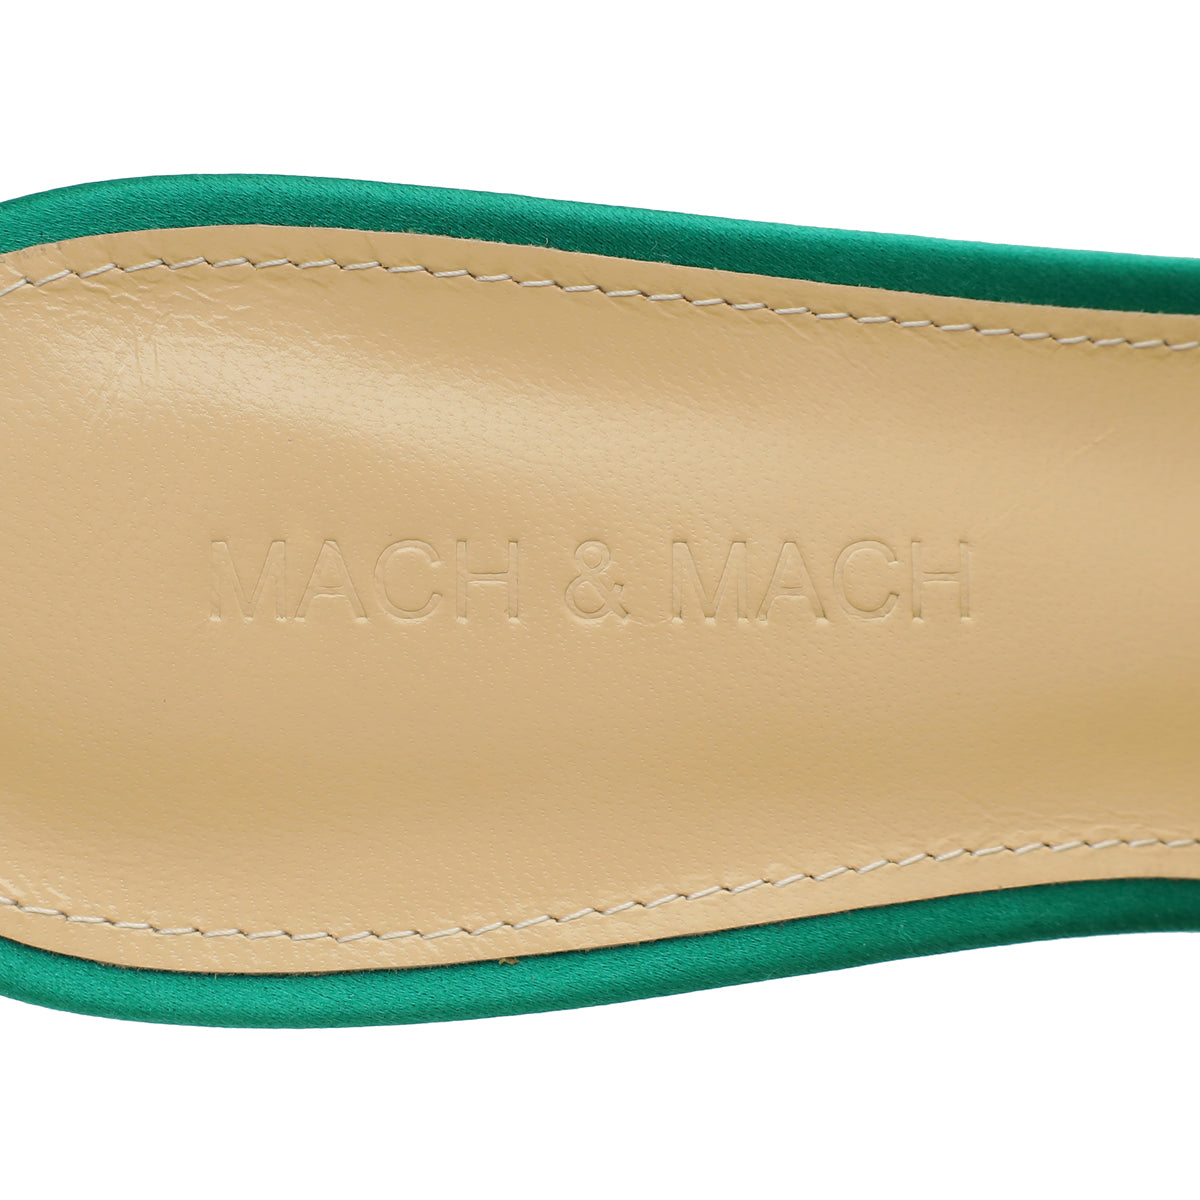 Mach & Mach Emerald Green Double Bow Square Toe 95mm Mules 39